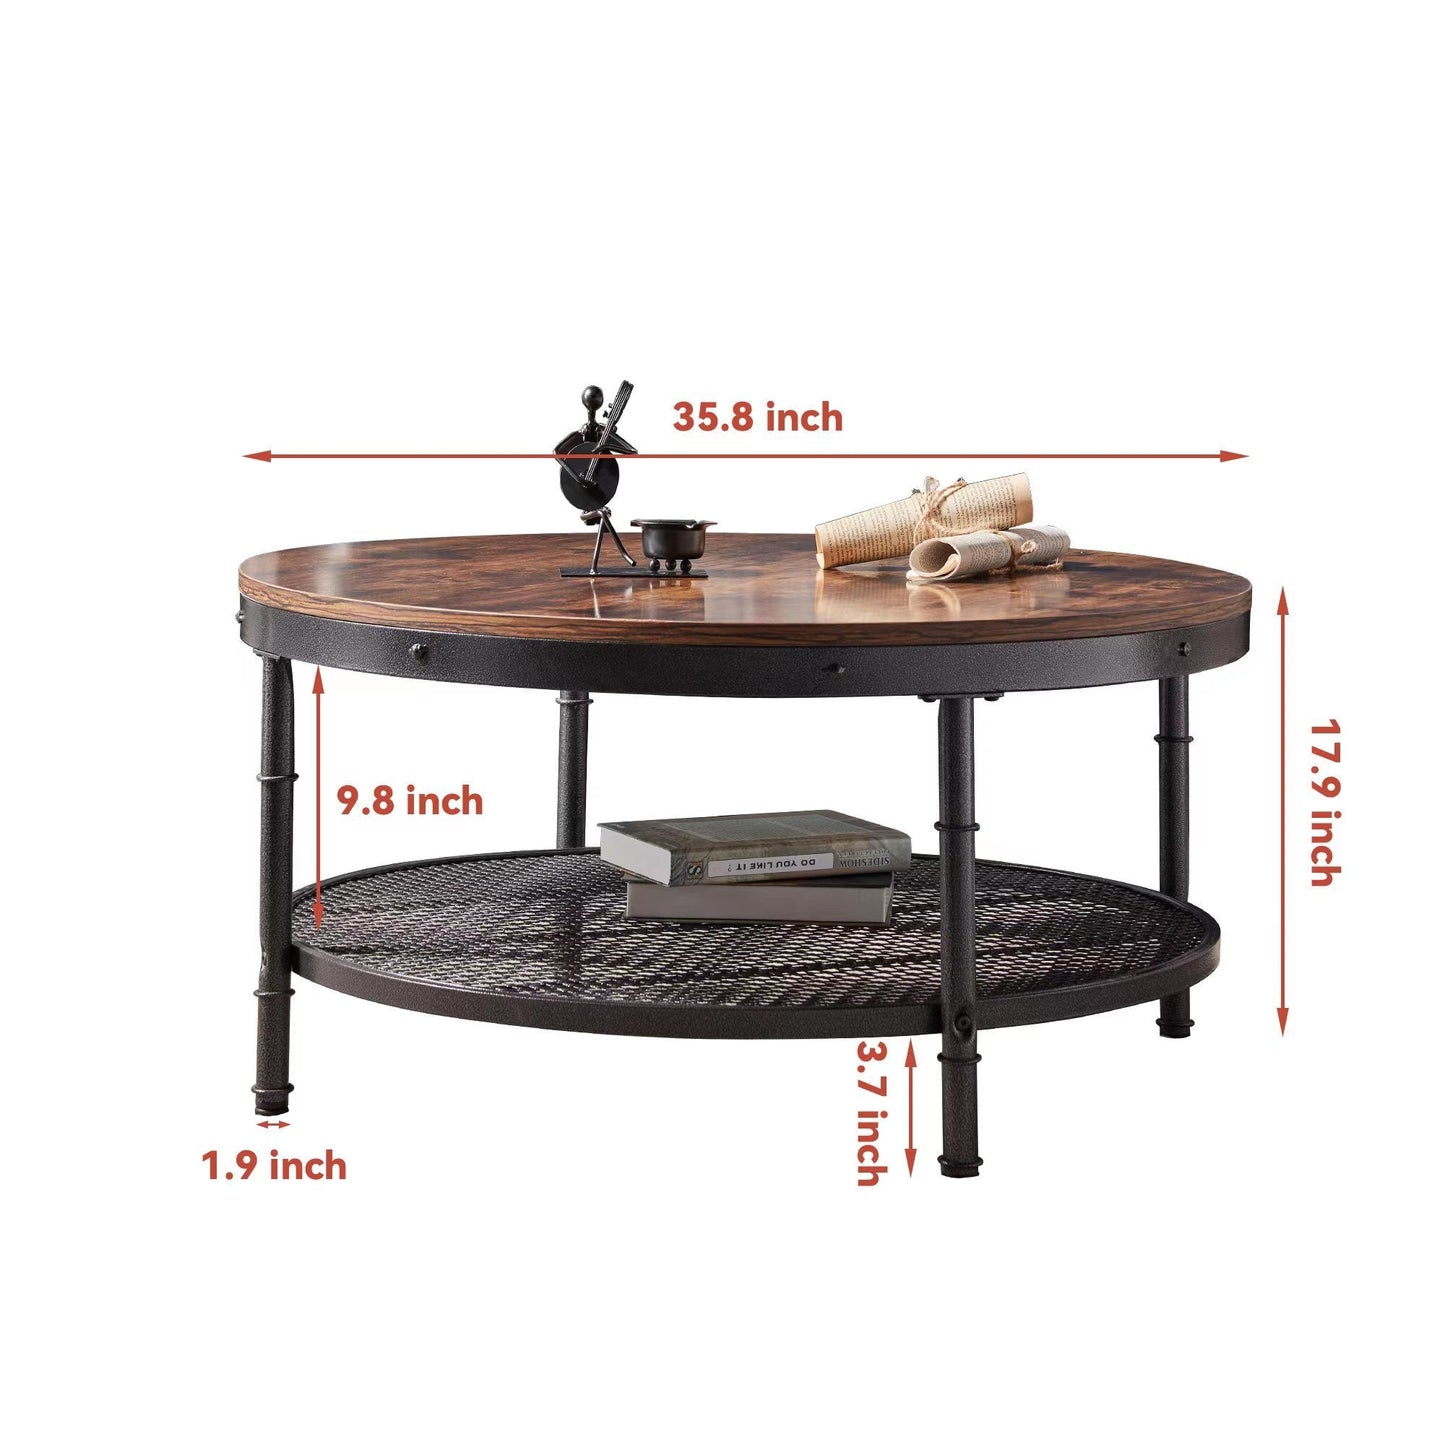 WESOME 2-Tier Single Panel Round Coffee Table with 3D Texture Metal Frame and Mesh Home Decor by Design